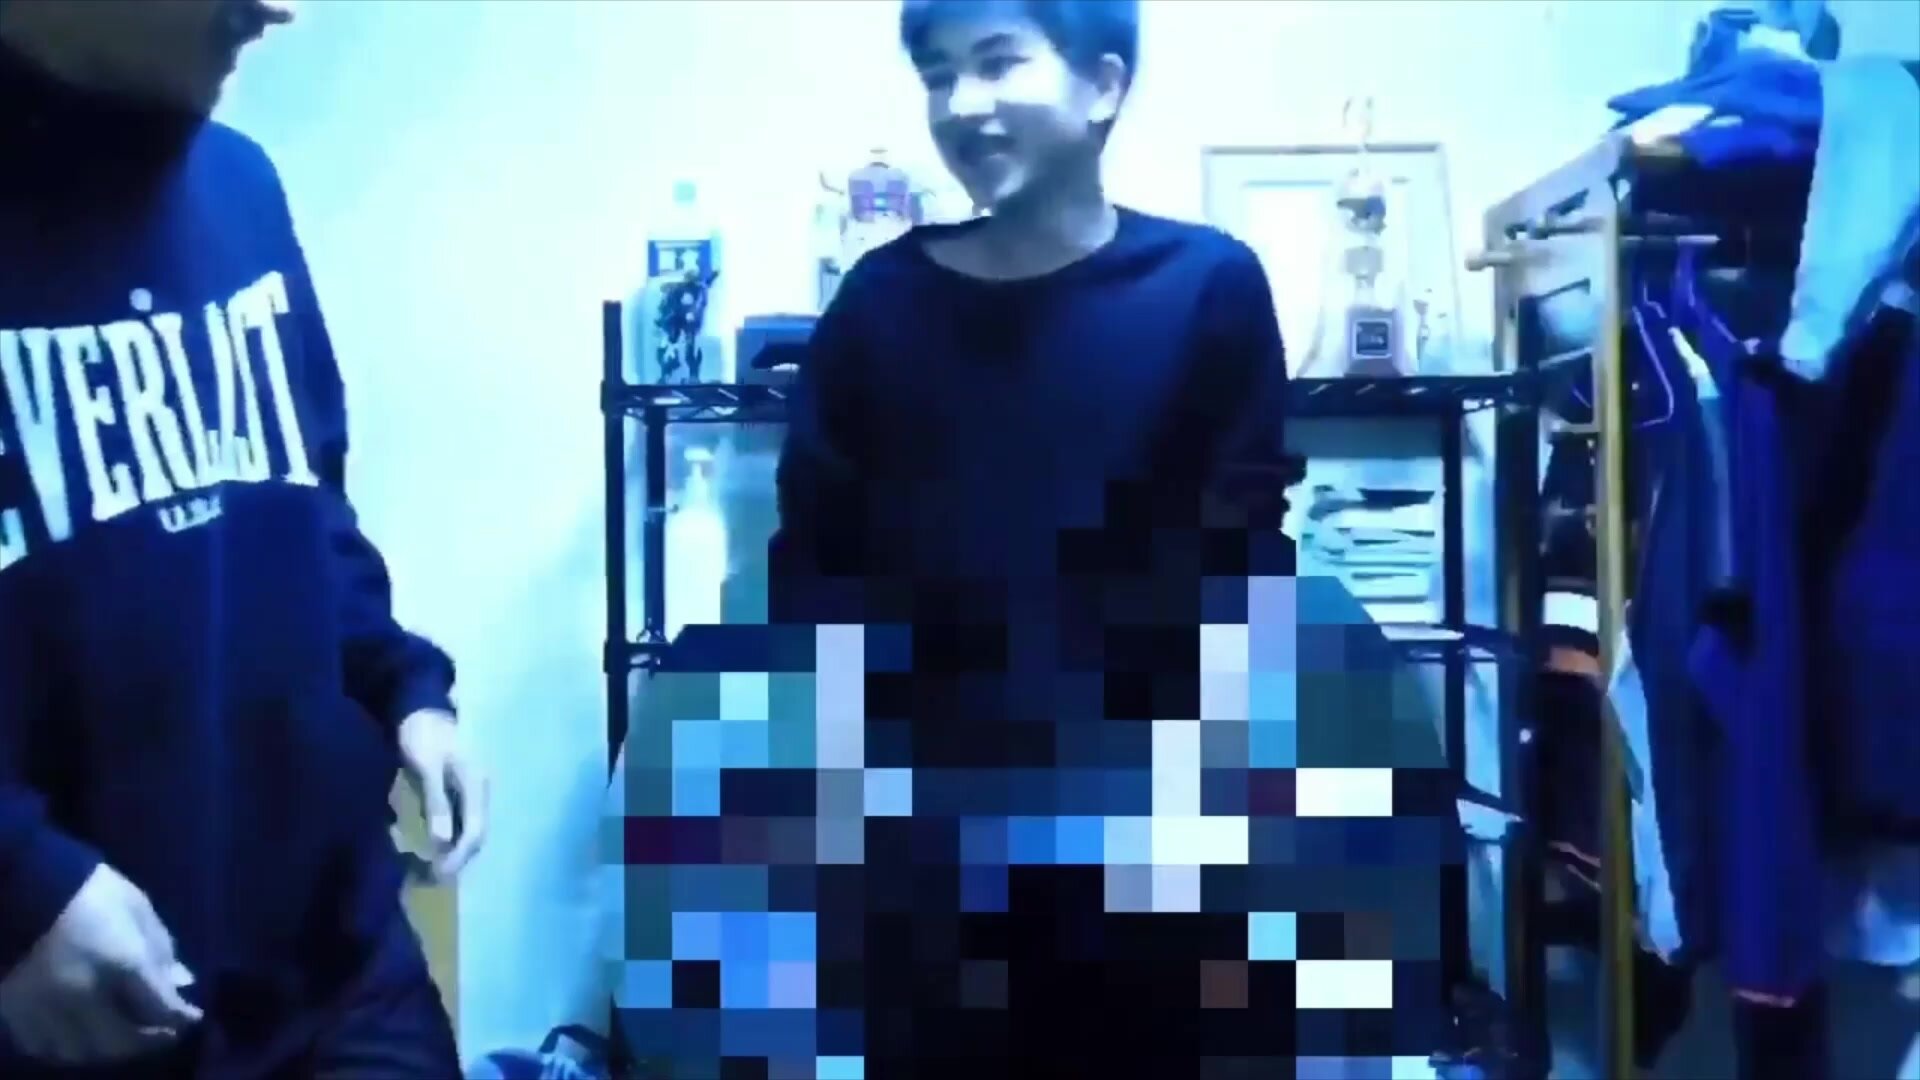 Japanese who undress while playing games flash